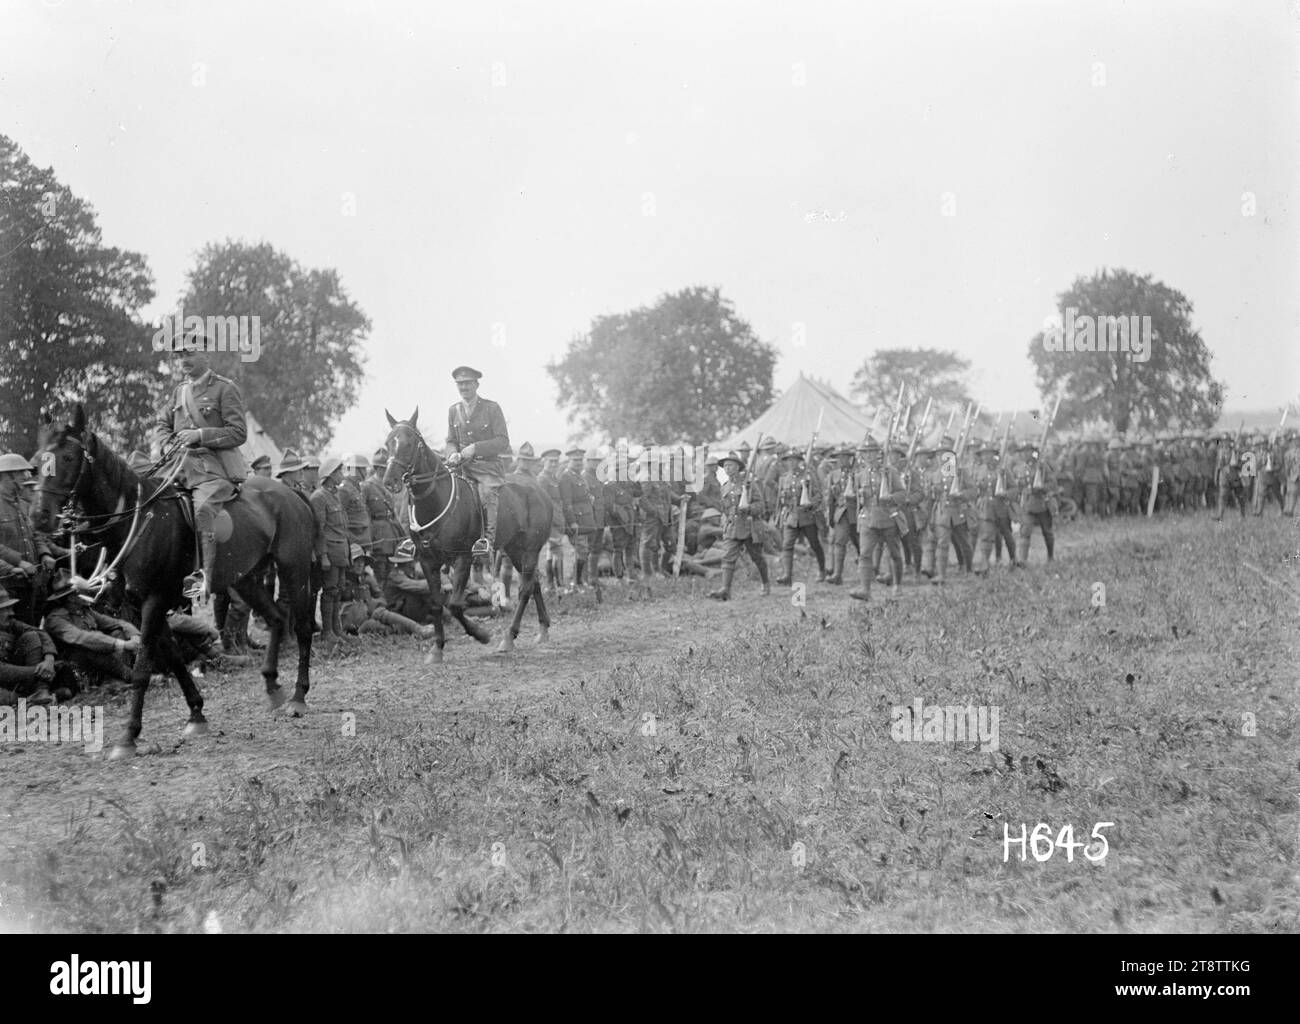 The march past of winners at a New Zealand Infantry Brigade competition, France, First prize winners marching past at a recreational event organised by a New Zealand Infantry Brigade during World War I. Activities included a horse show and guard mounting. Photograph taken Vaucelles 1 June 1918 Stock Photo